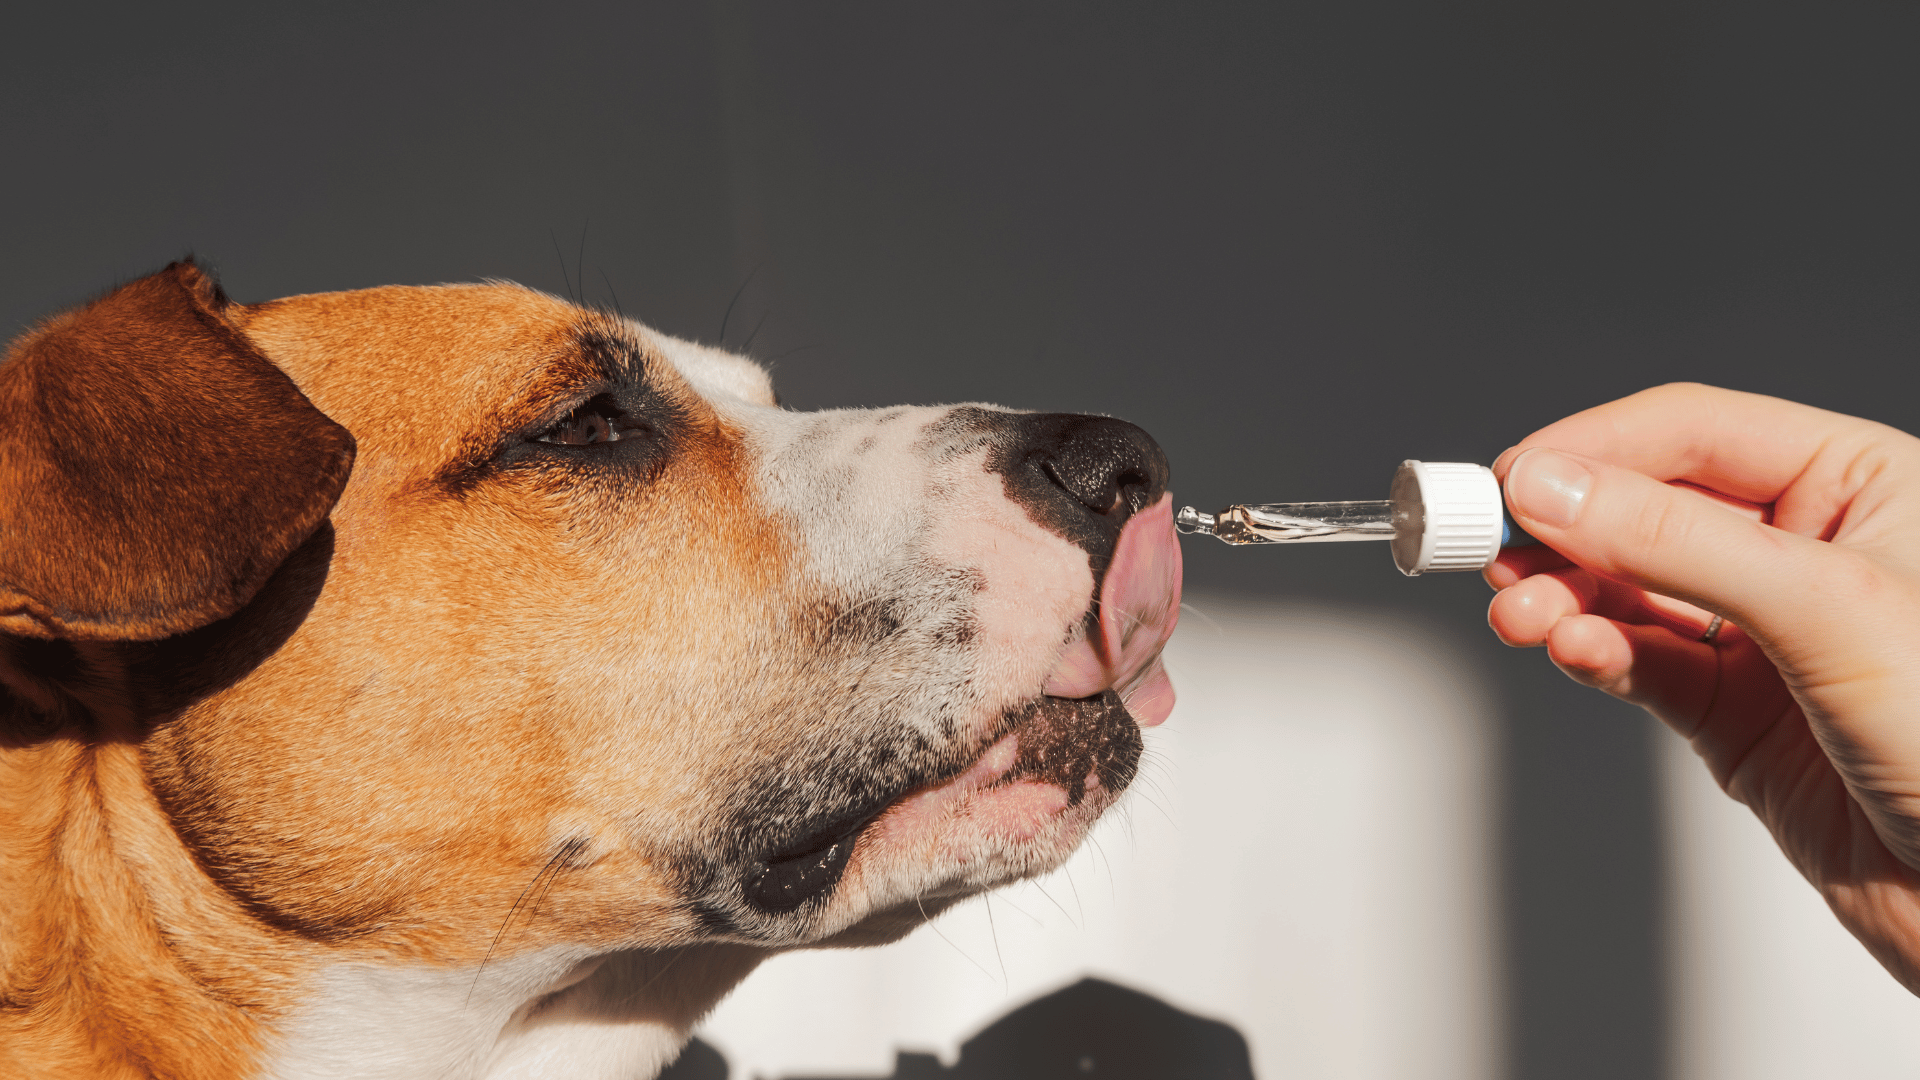 Dog taking supplements through a dropper